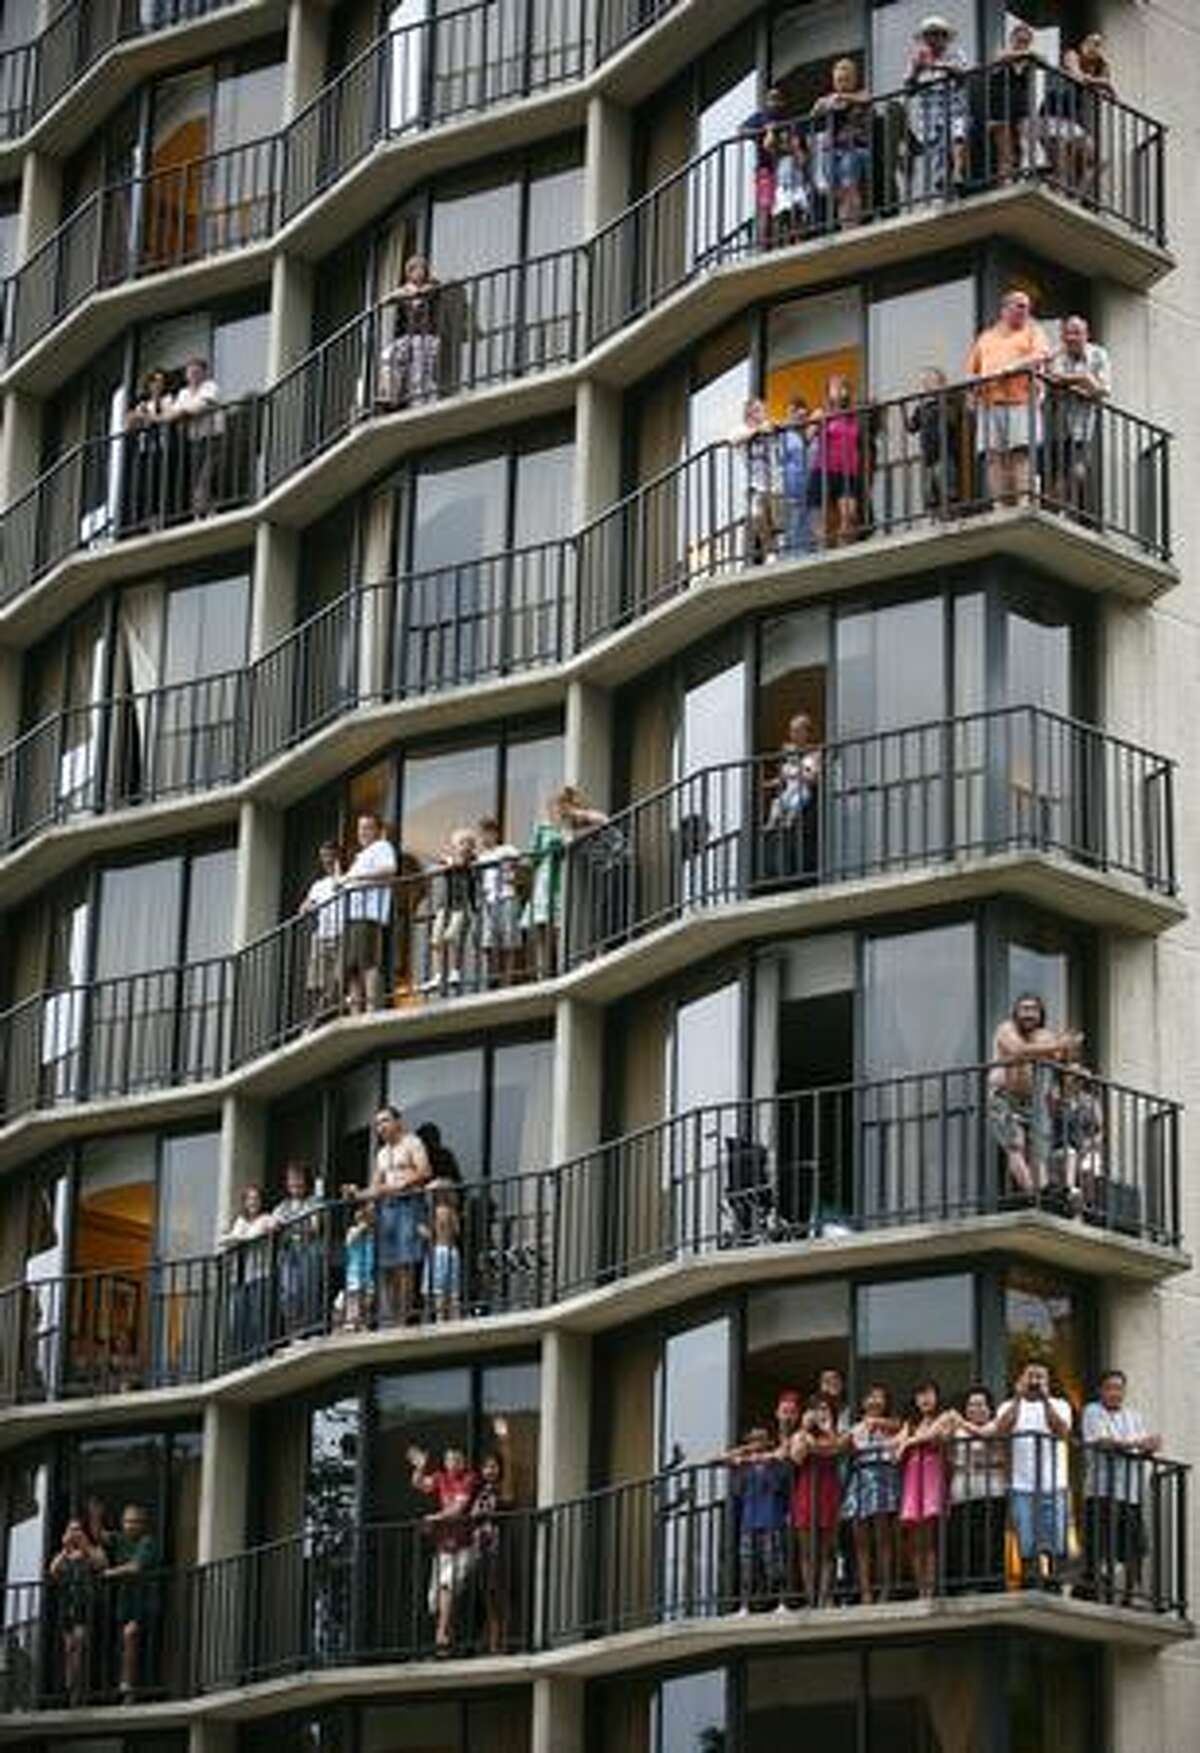 People watch the parade from the Warwick Hotel during the Seafair Torchlight parade on Saturday July 25, 2009 along 4th Avenue in Seattle.